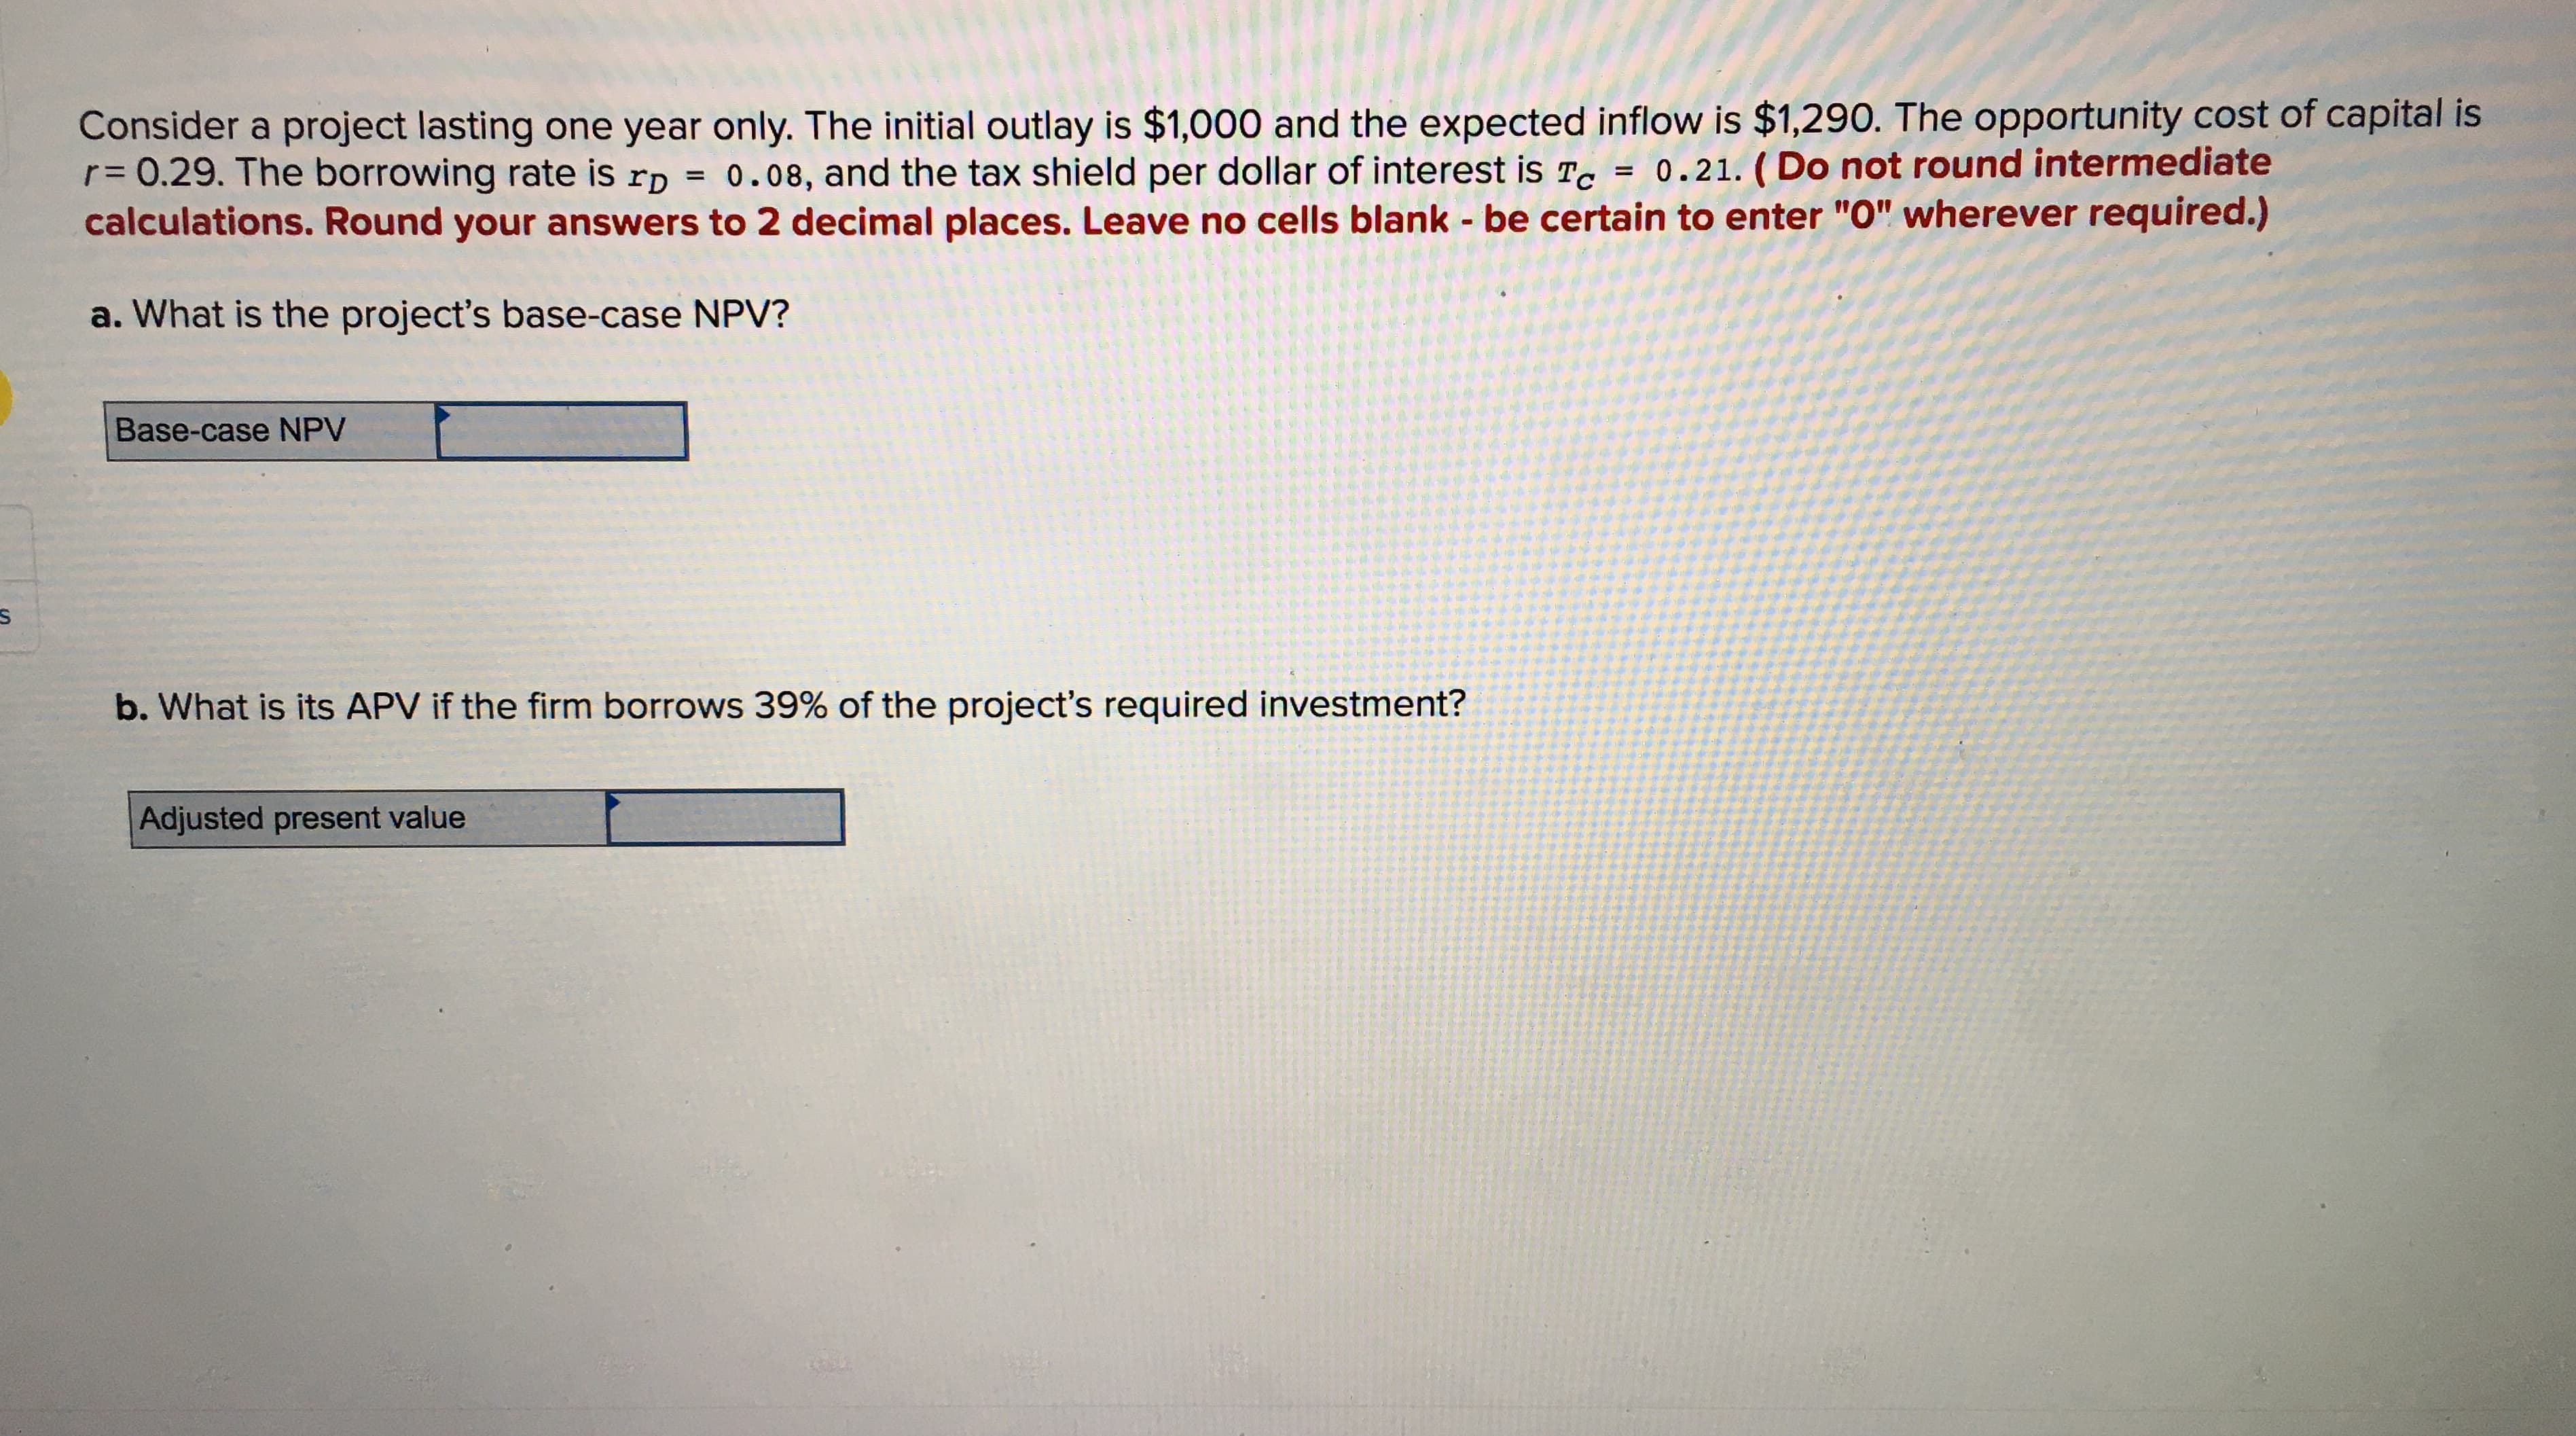 Consider a project lasting one year only. The initial outlay is $1,000 and the expected inflow is $1,290. The opportunity cost of capital is
r = 0.29. The borrowing rate is rD
calculations. Round your answers to 2 decimal places. Leave no cells blank - be certain to enter "O" wherever required.)
0.21. (Do not round intermediate
0.08, and the tax shield per dollar of interest is Tc
a. What is the project's base-case NPV?
Base-case NPV
b. What is its APV if the firm borrows 39% of the project's required investment?
Adjusted present value
